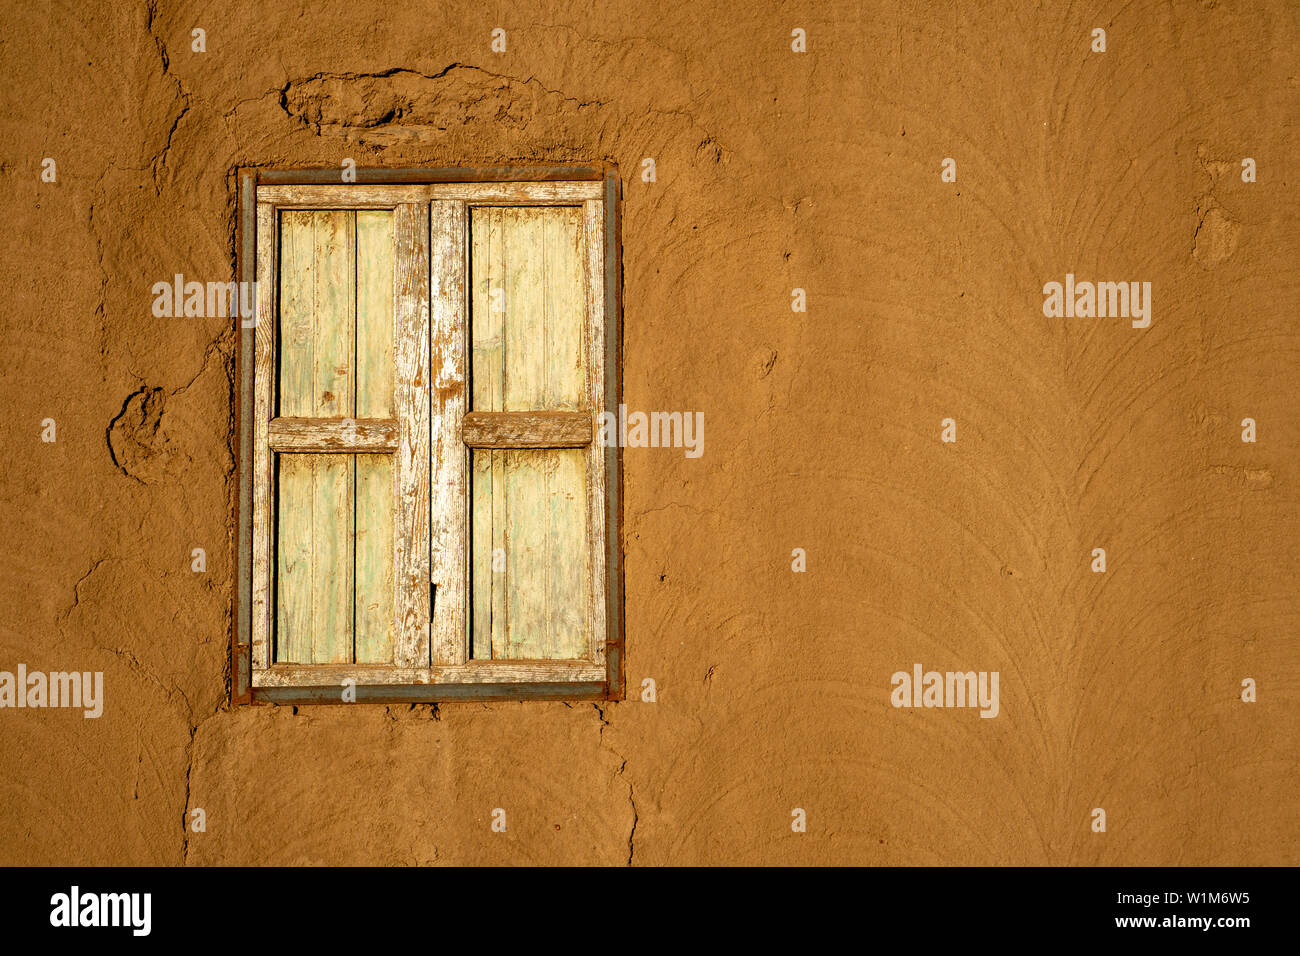 Traditional Nubian house made of mud in Abri, Sudan Stock Photo